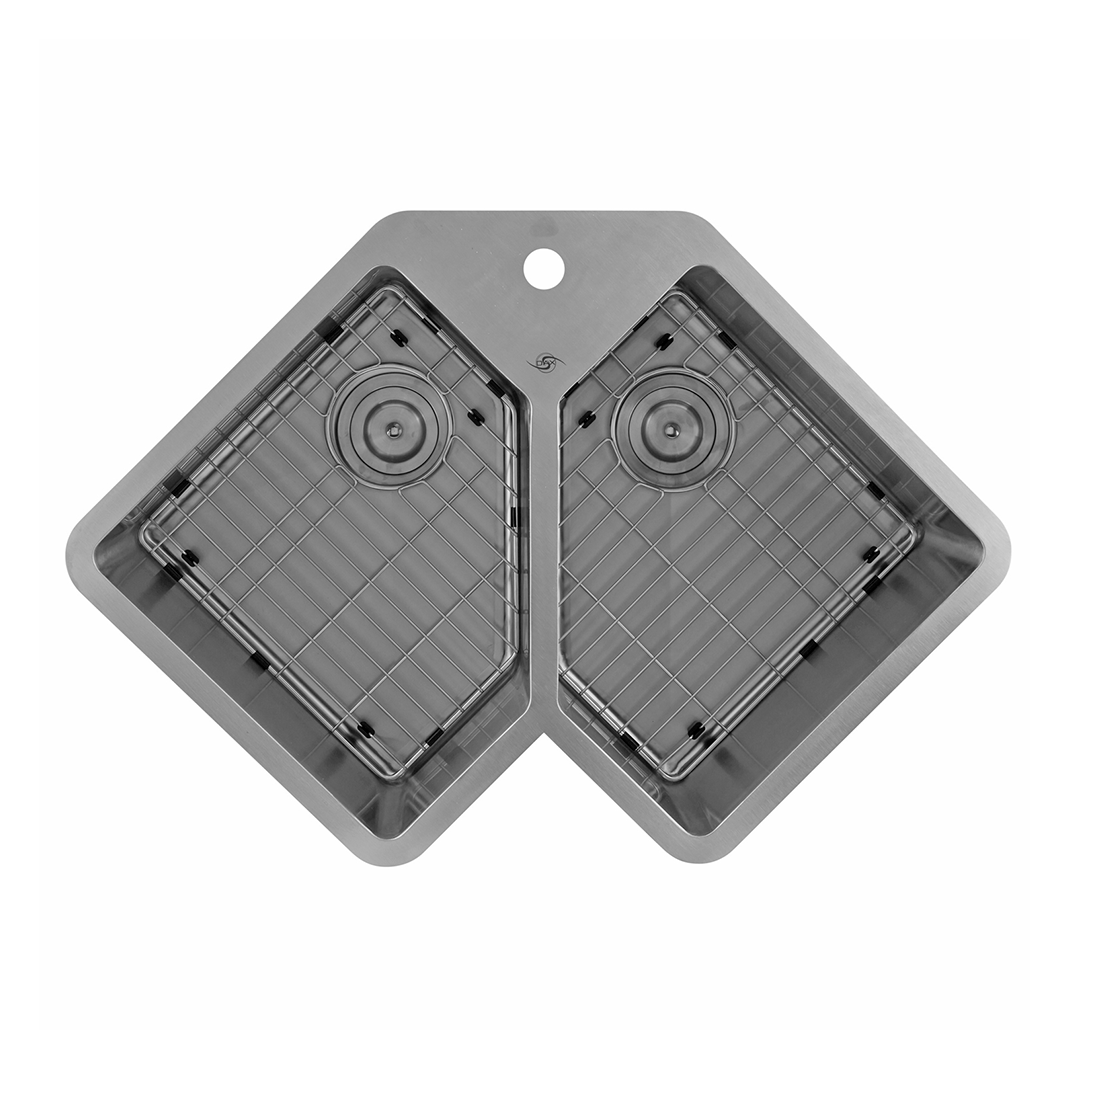 DAX Grid for Kitchen Sink, Stainless Steel Body, Chrome Finish, Compatible with DAX-347, 14 x 14 Inches (GRID-347)